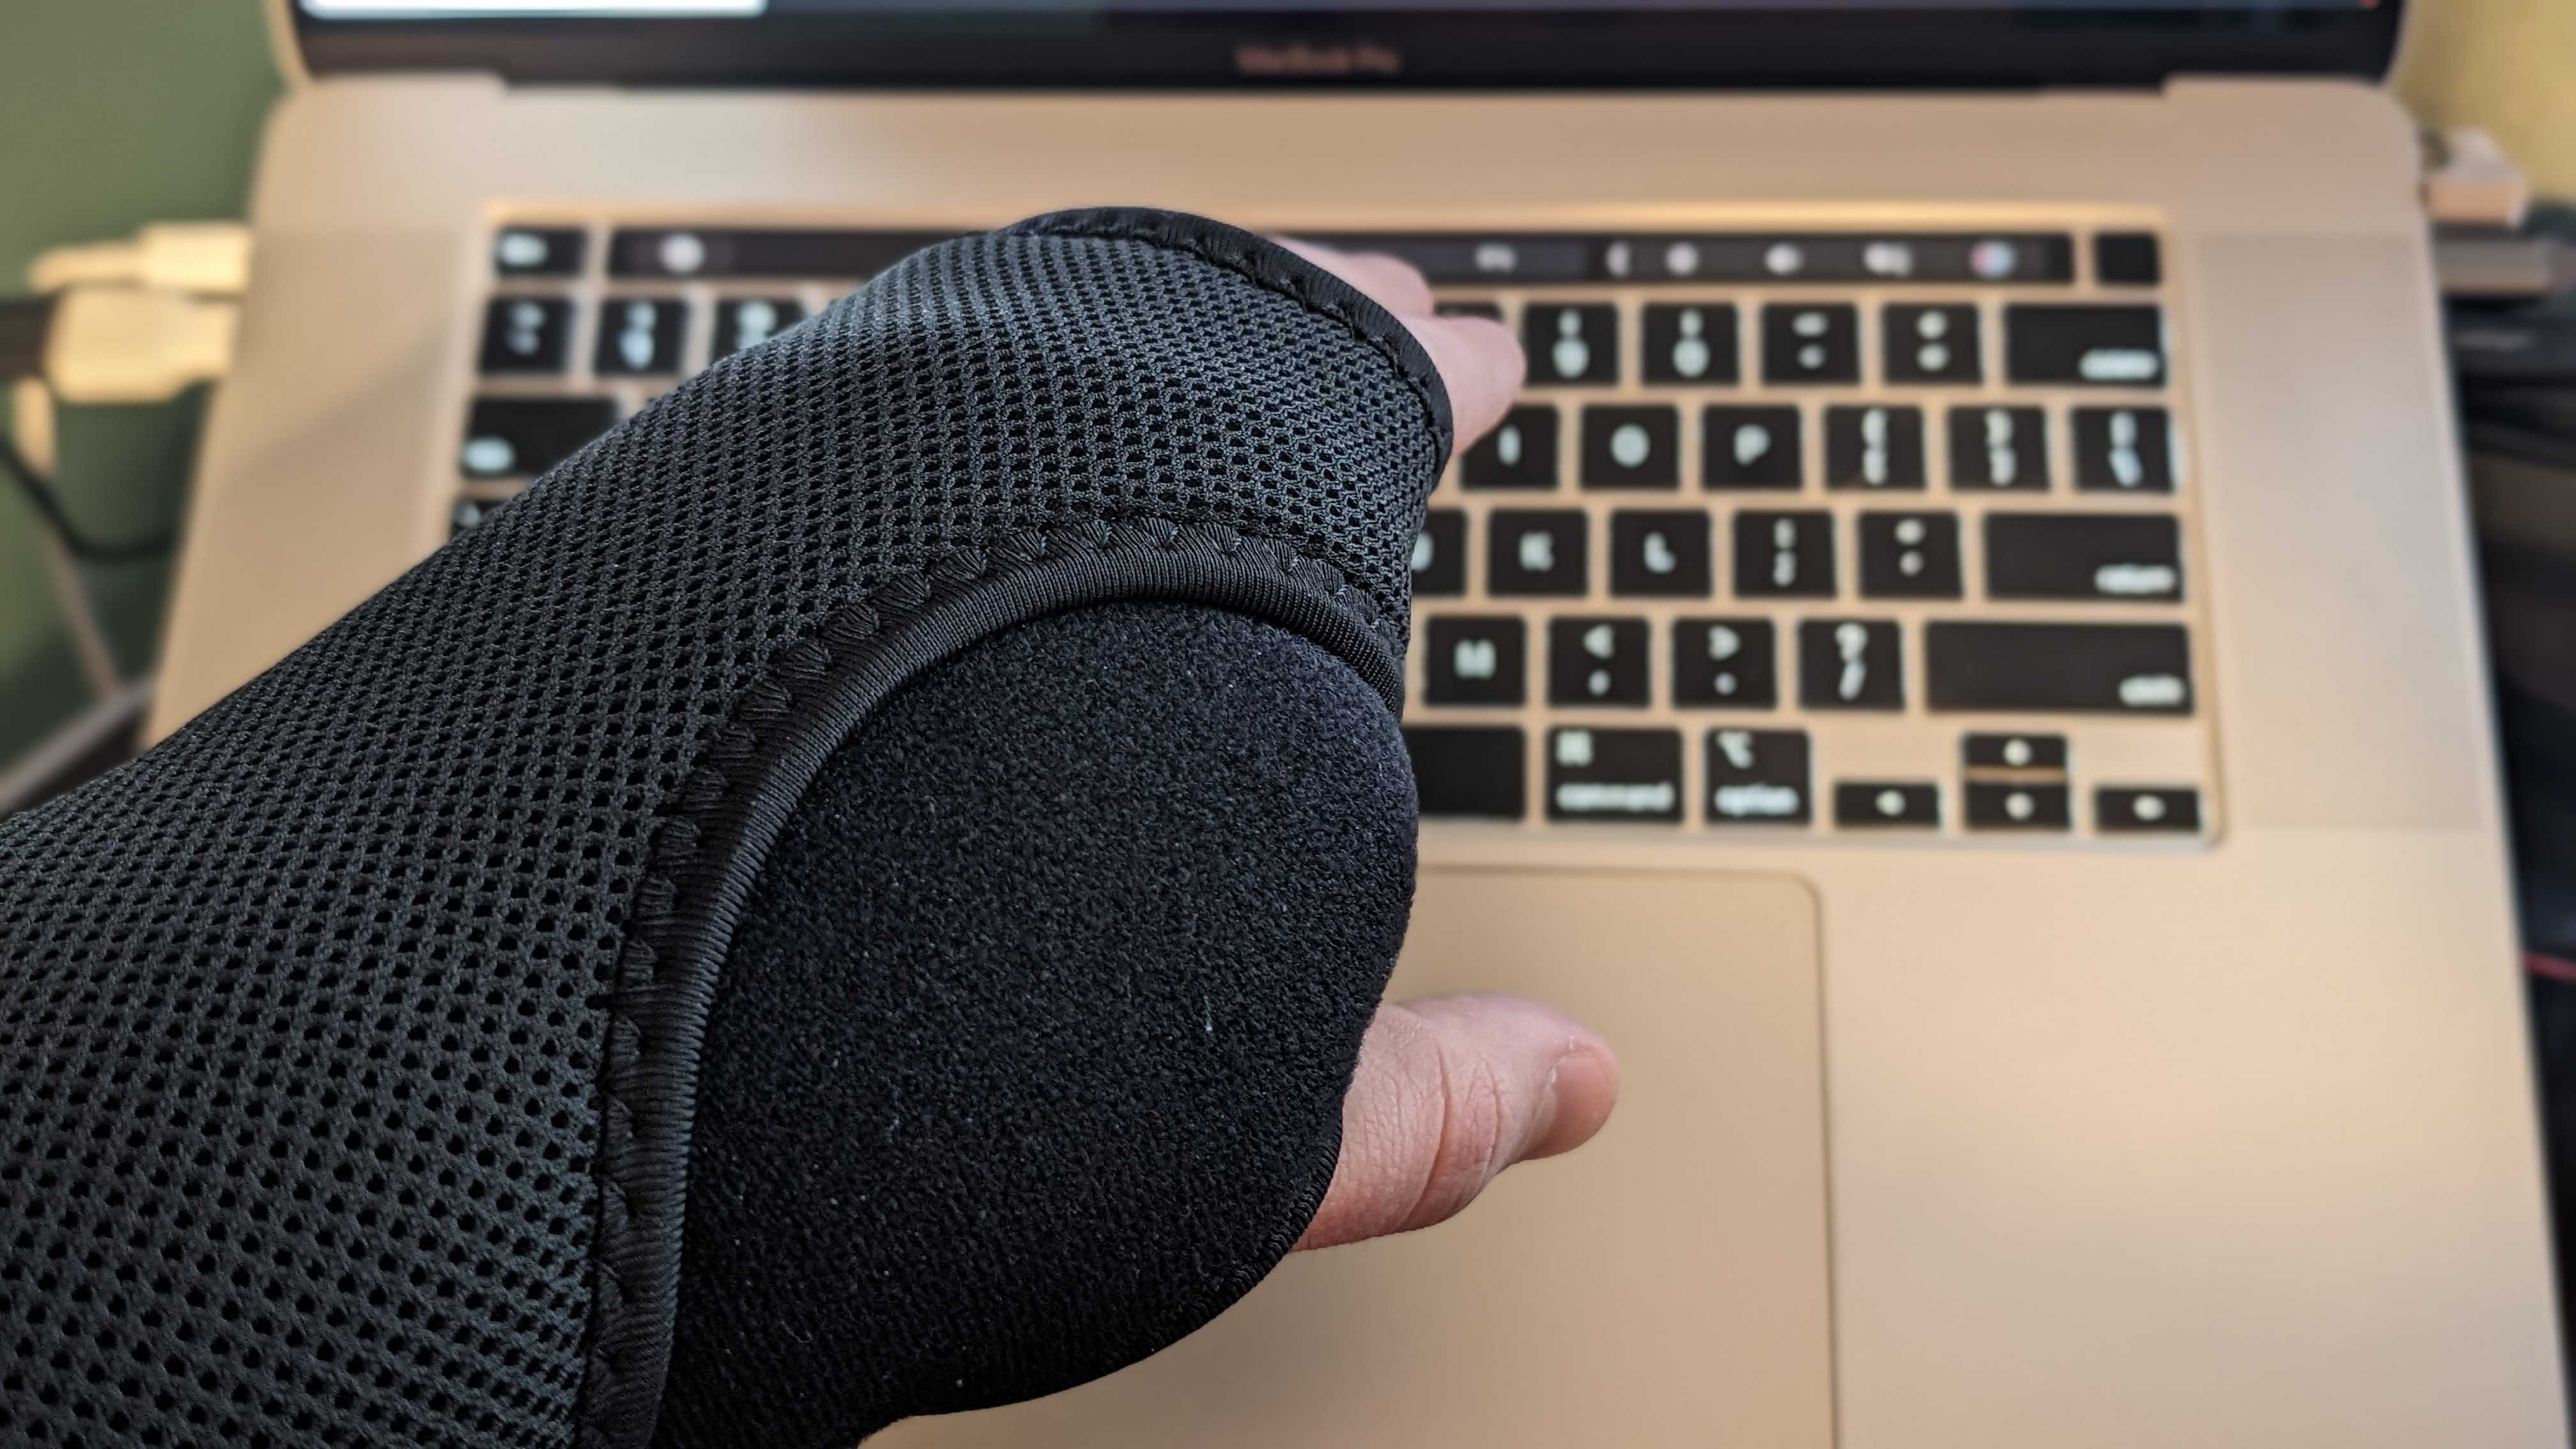 hand in brace hovering over a keyboard